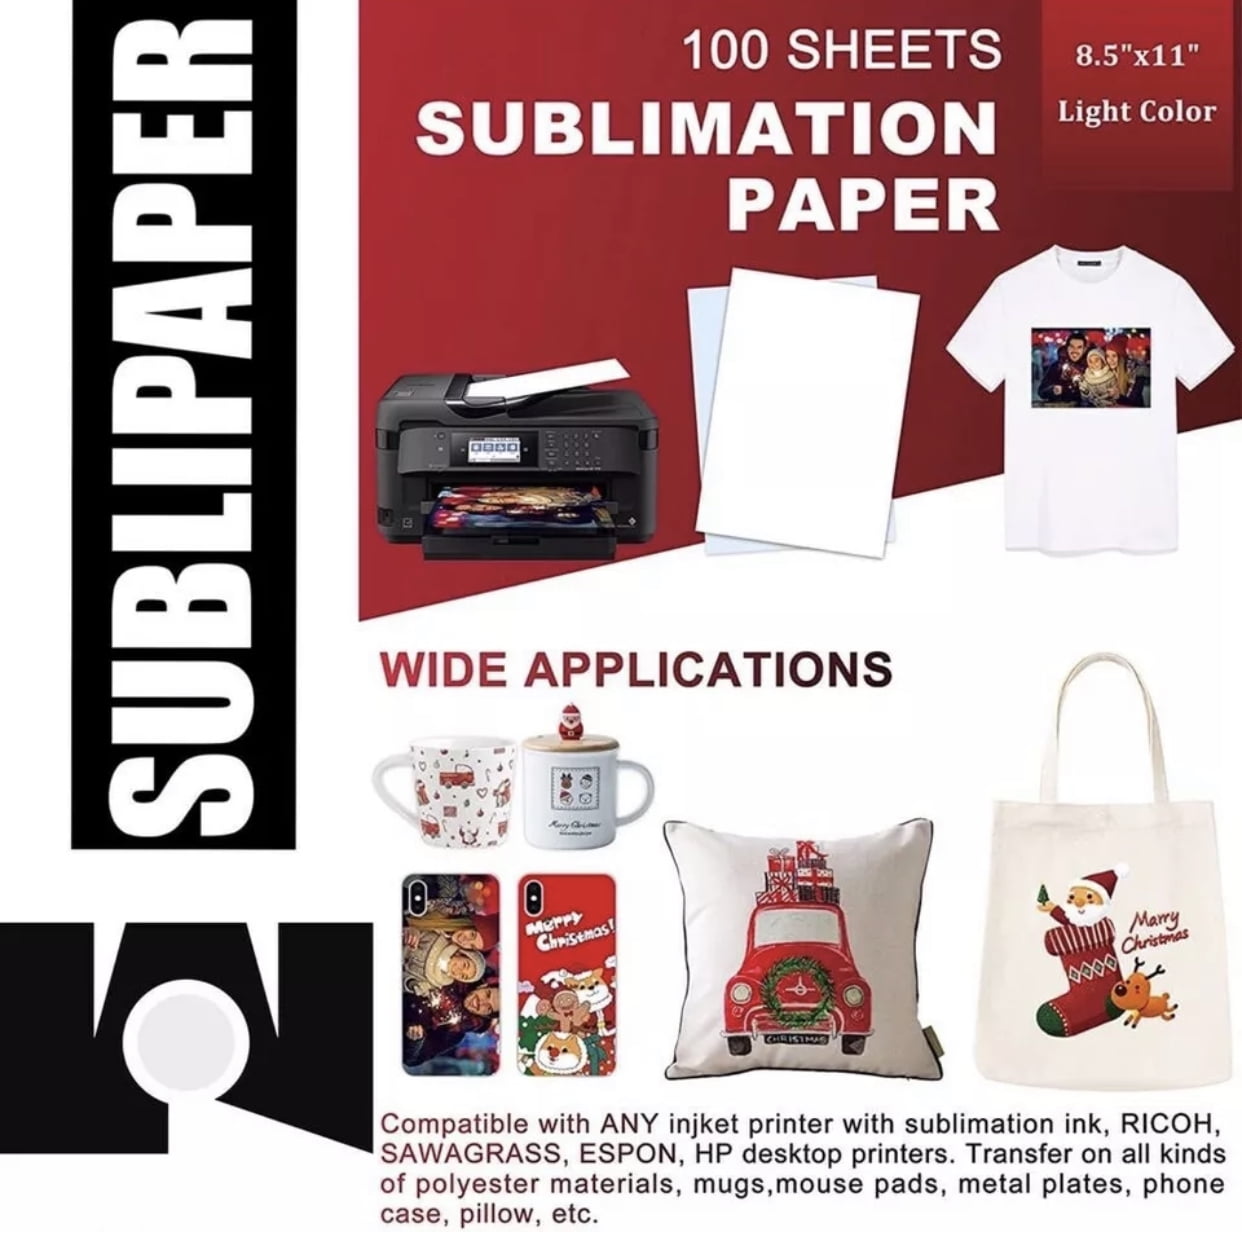 Koala Sublimation Heat Transfer Paper 8.5x11 Inch for Inkjet Printer Compatible with Sublimation Ink 100 Sheets 123gsm